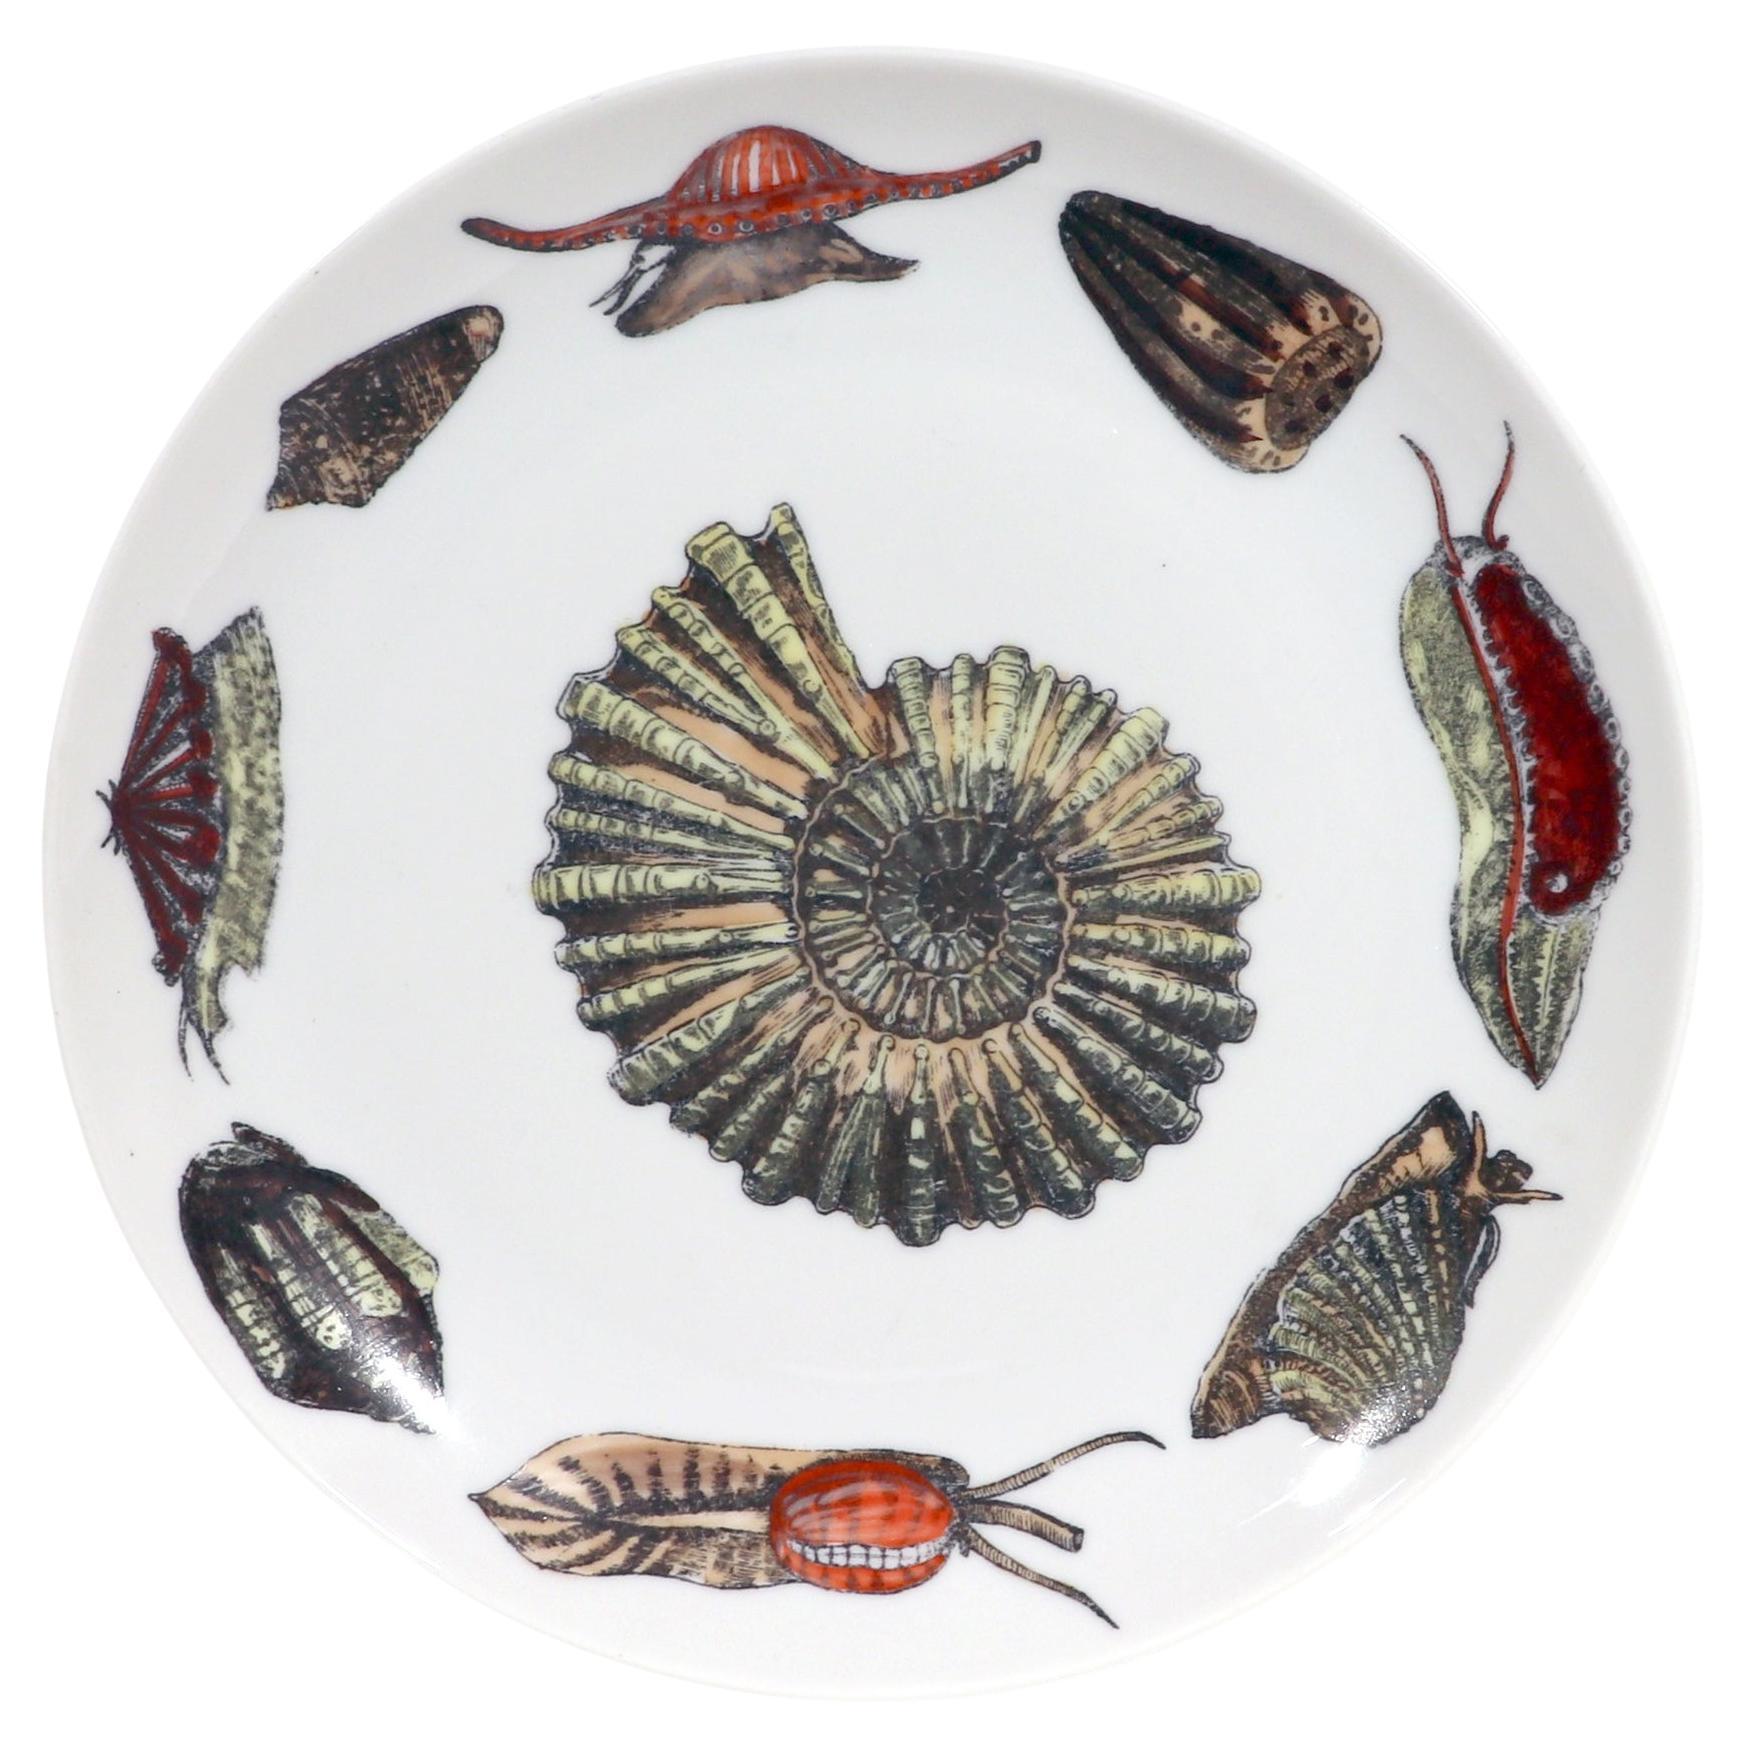 Piero Fornasetti Porcelain Conchiglie Seashell Plate With Snails and Mollusks